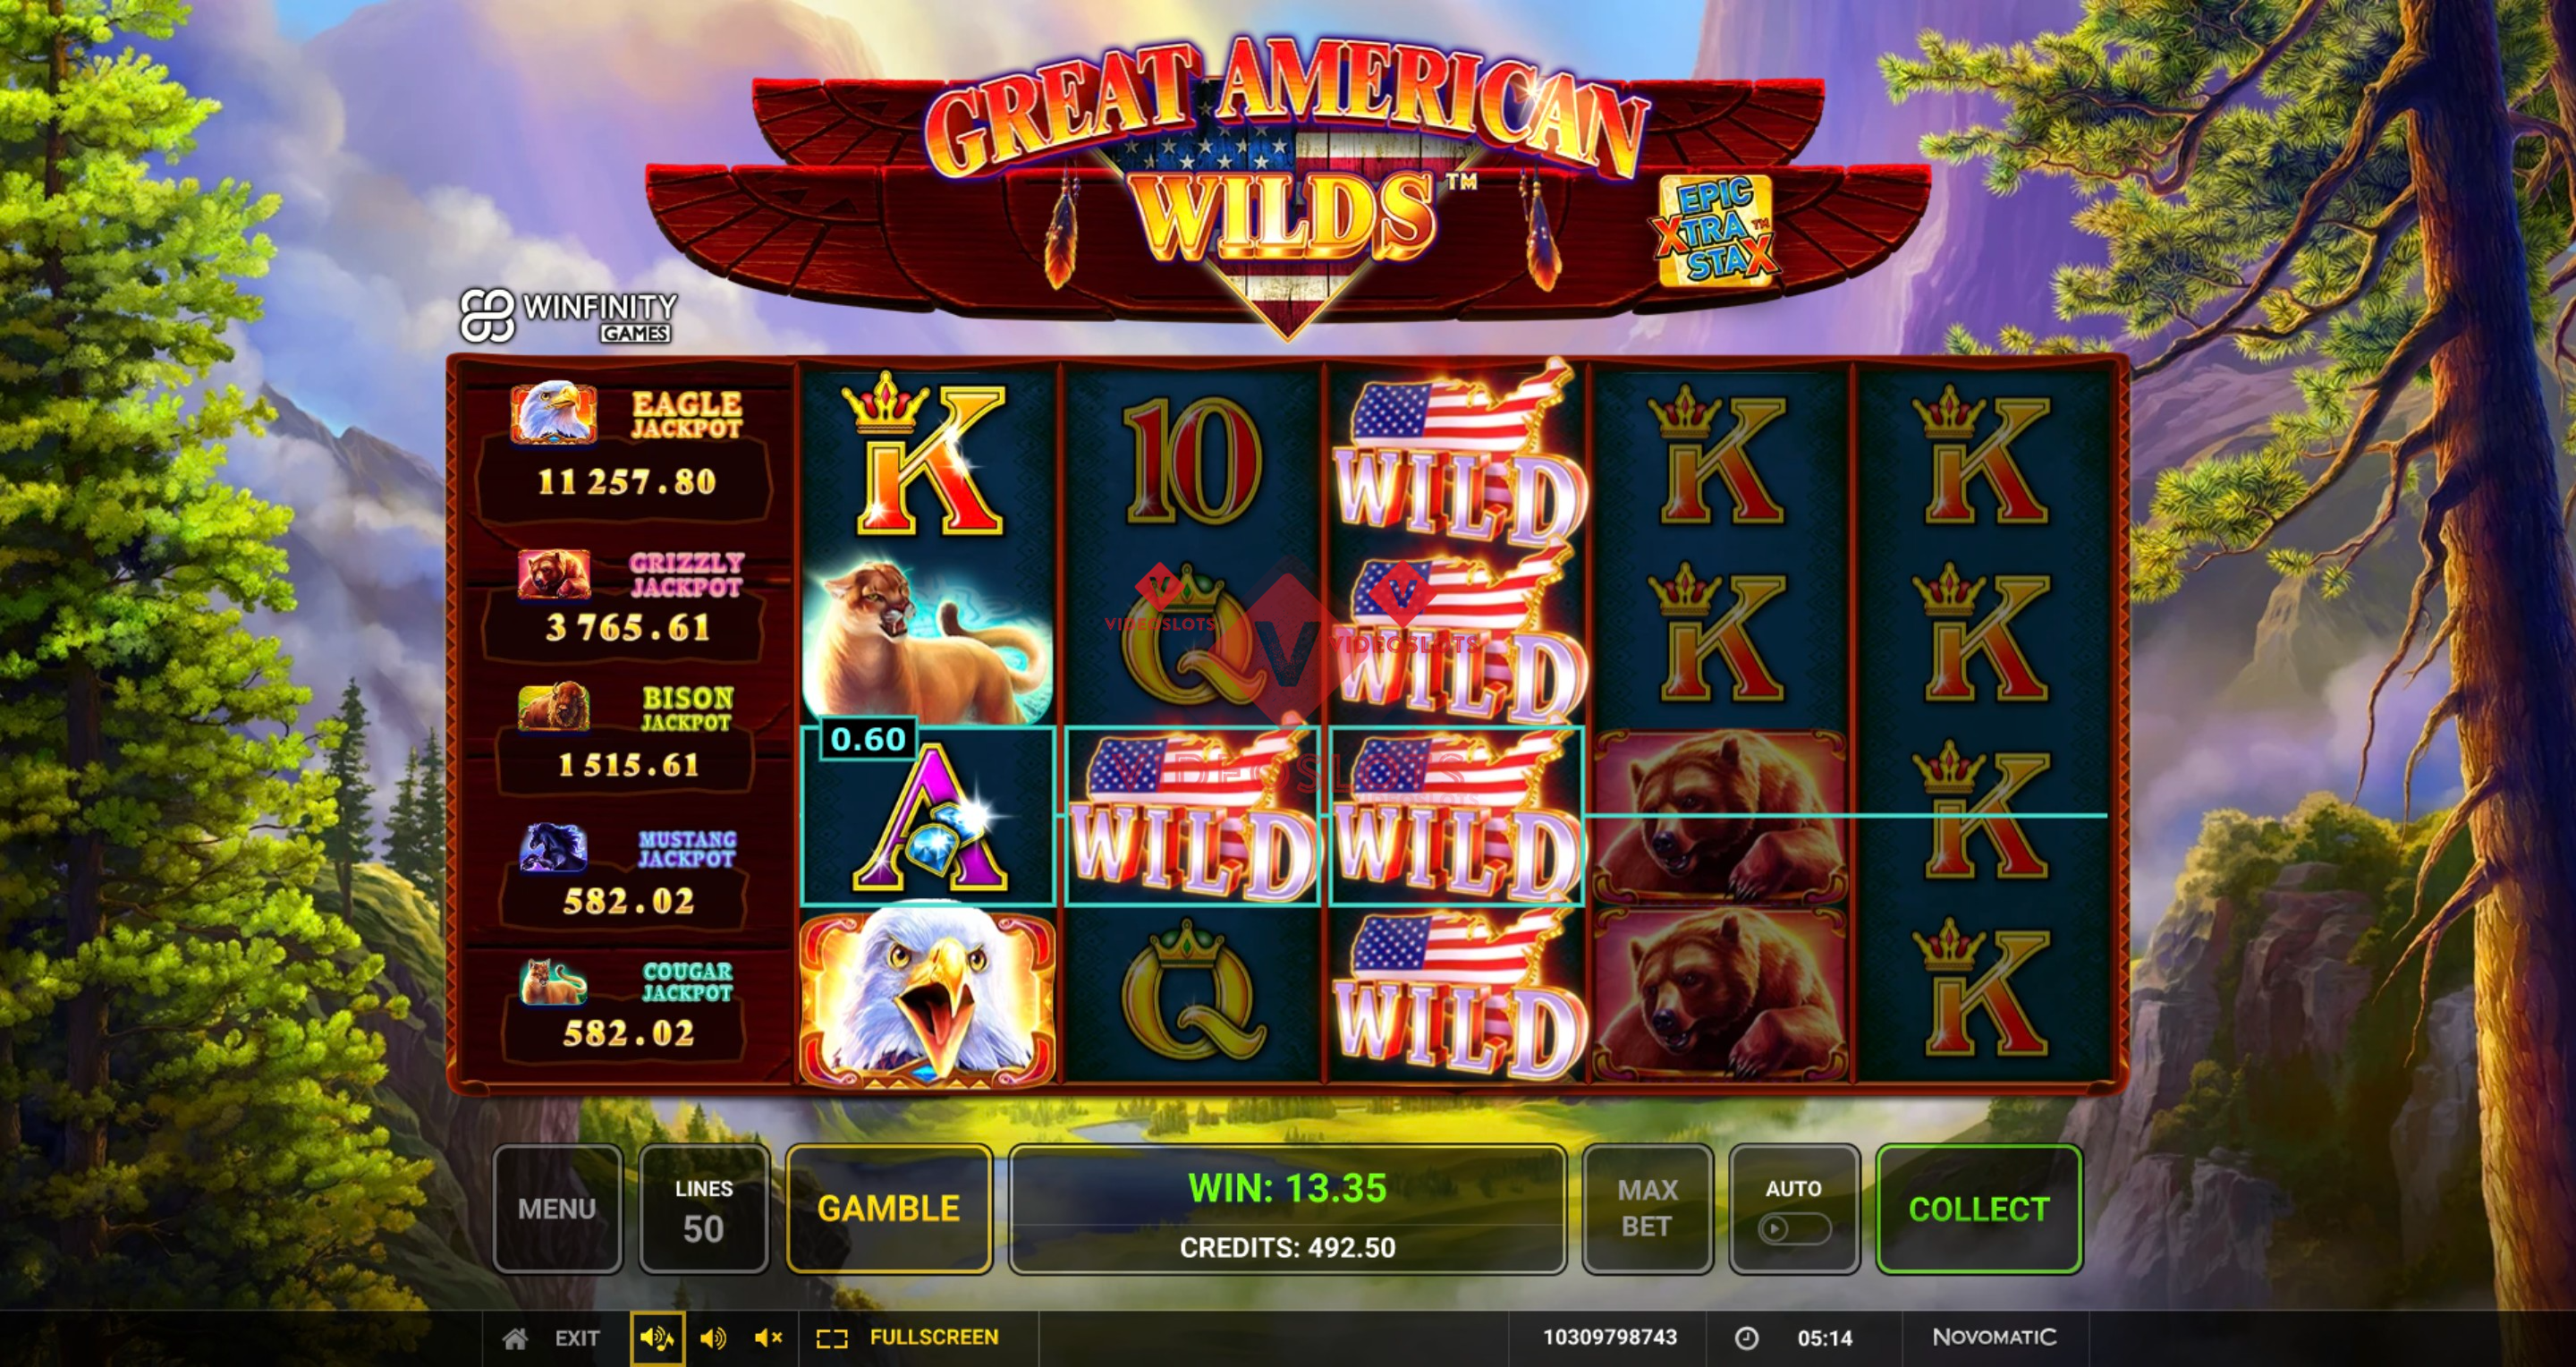 Base Game for Great American Wilds slot from Greentube